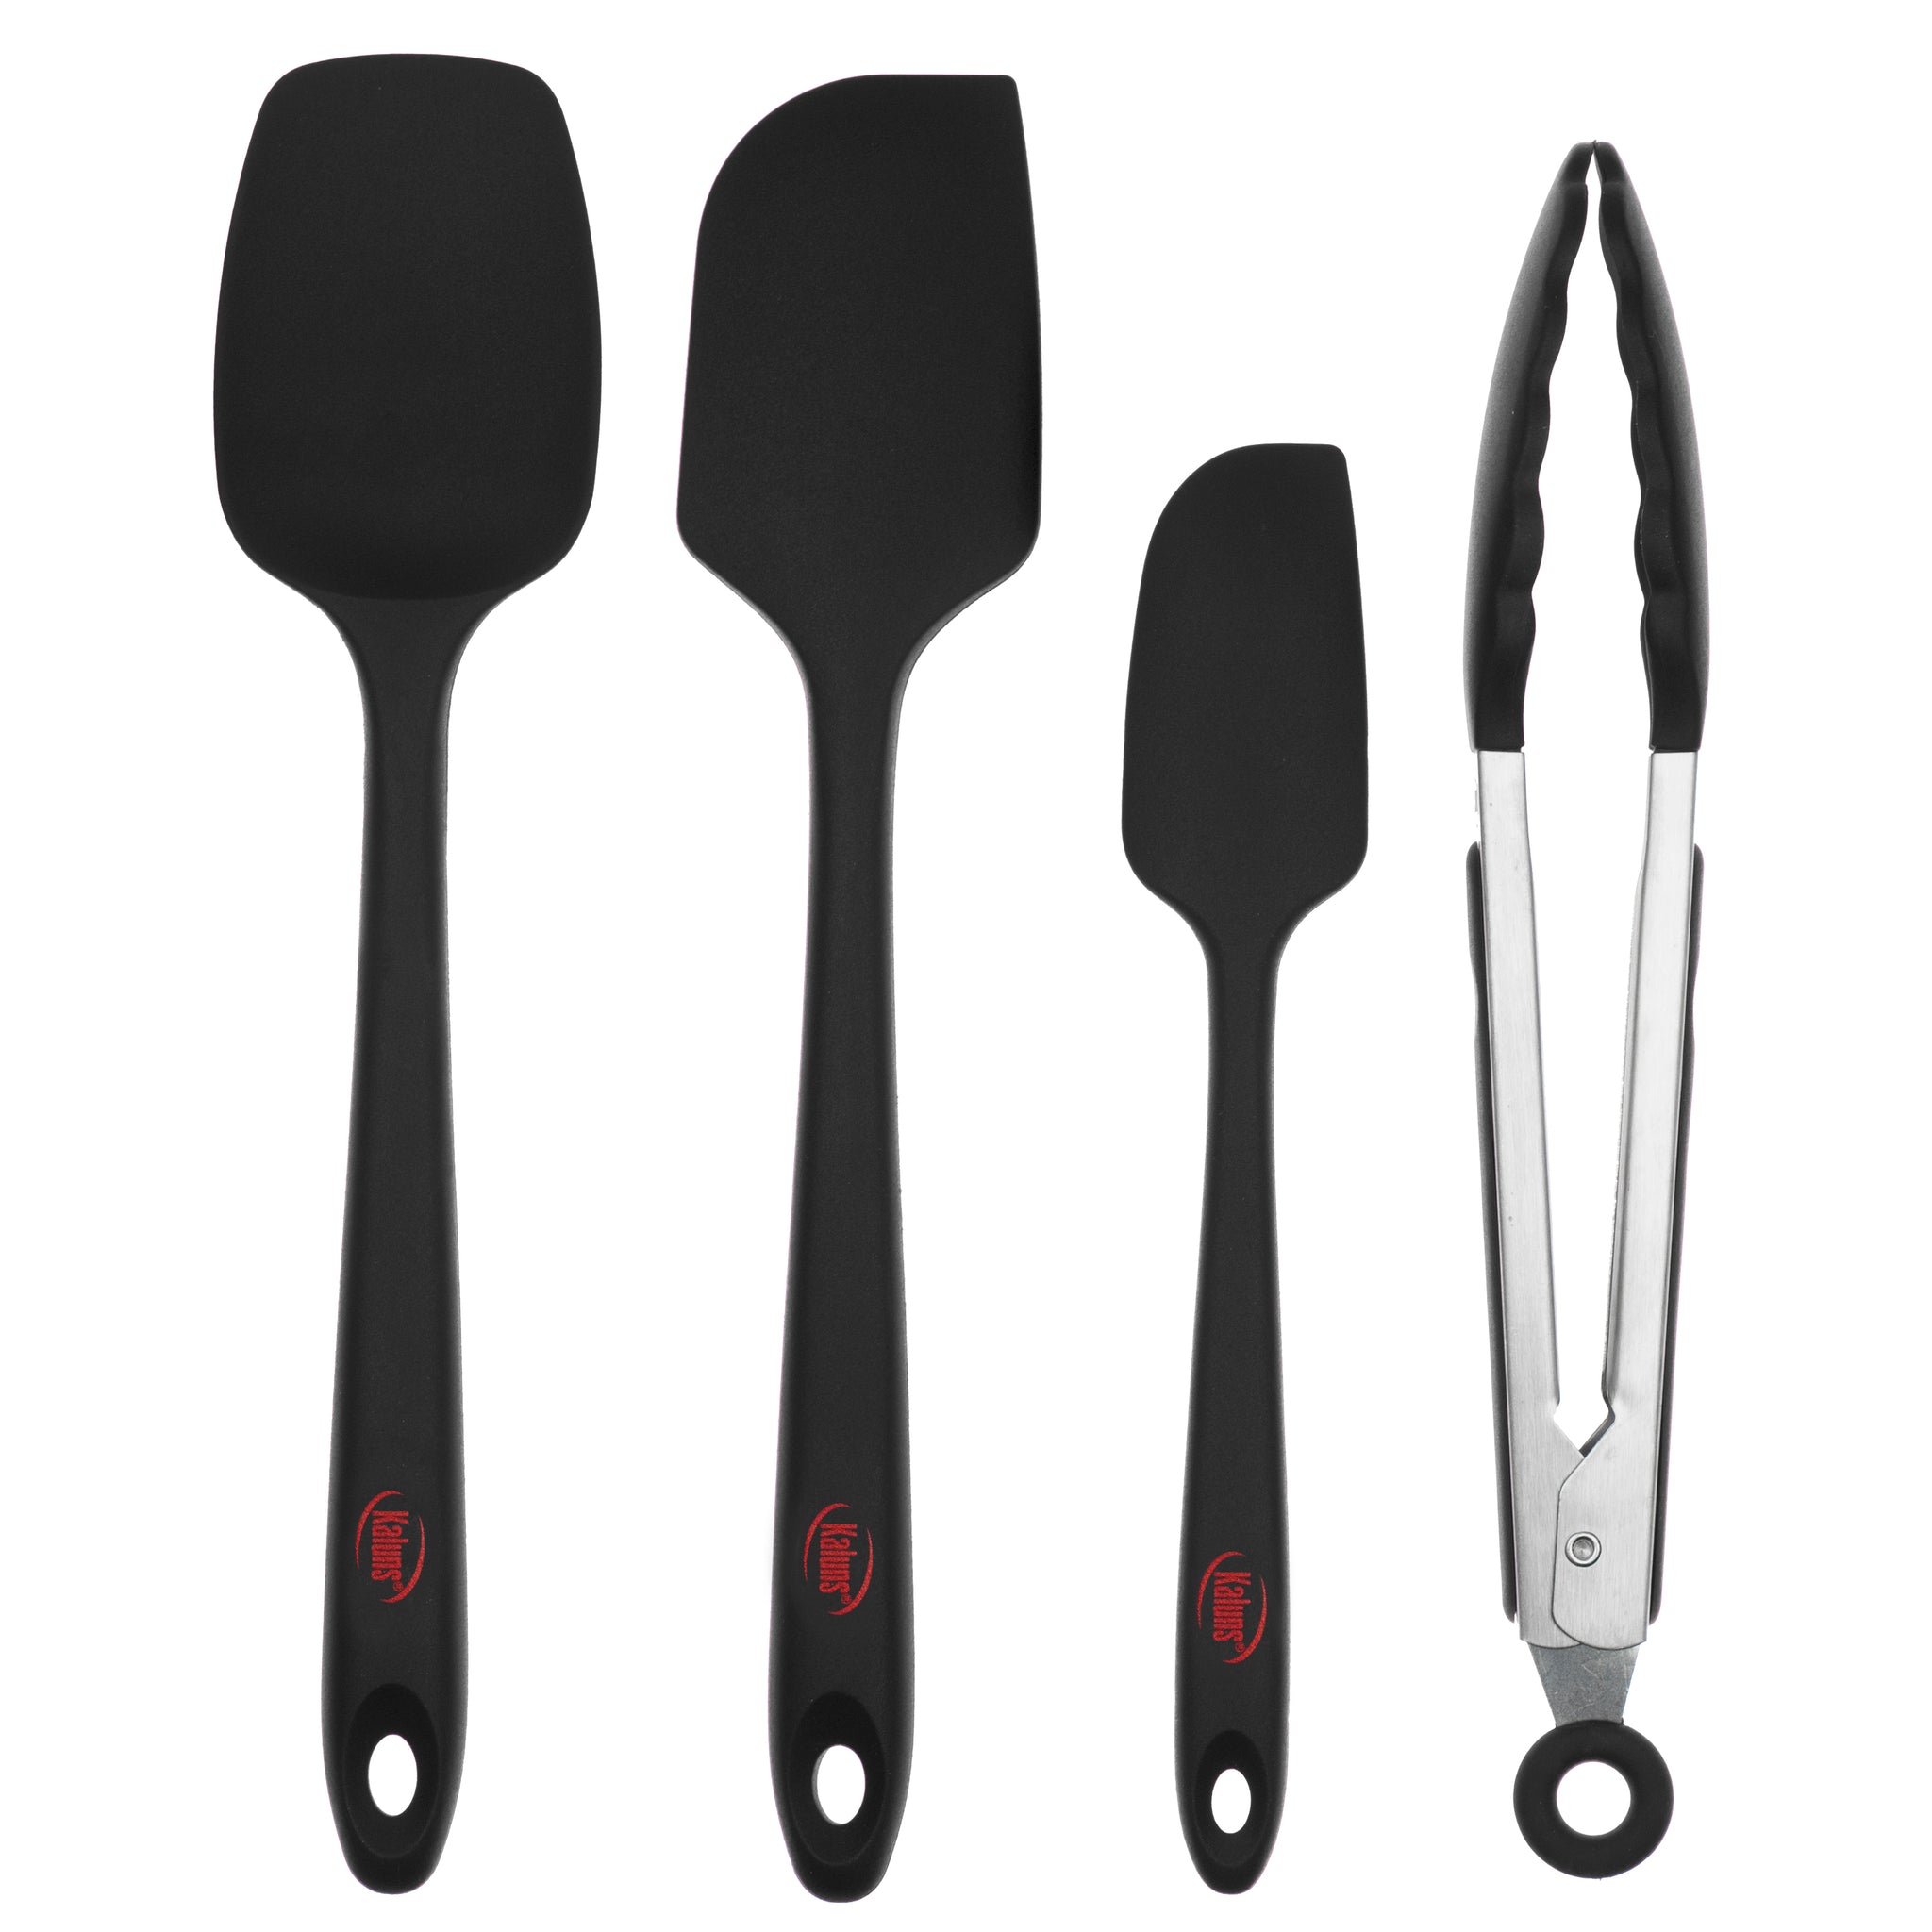 4 Pieces Silicone Cooking Spoons Set, Silicone Serving Spoon